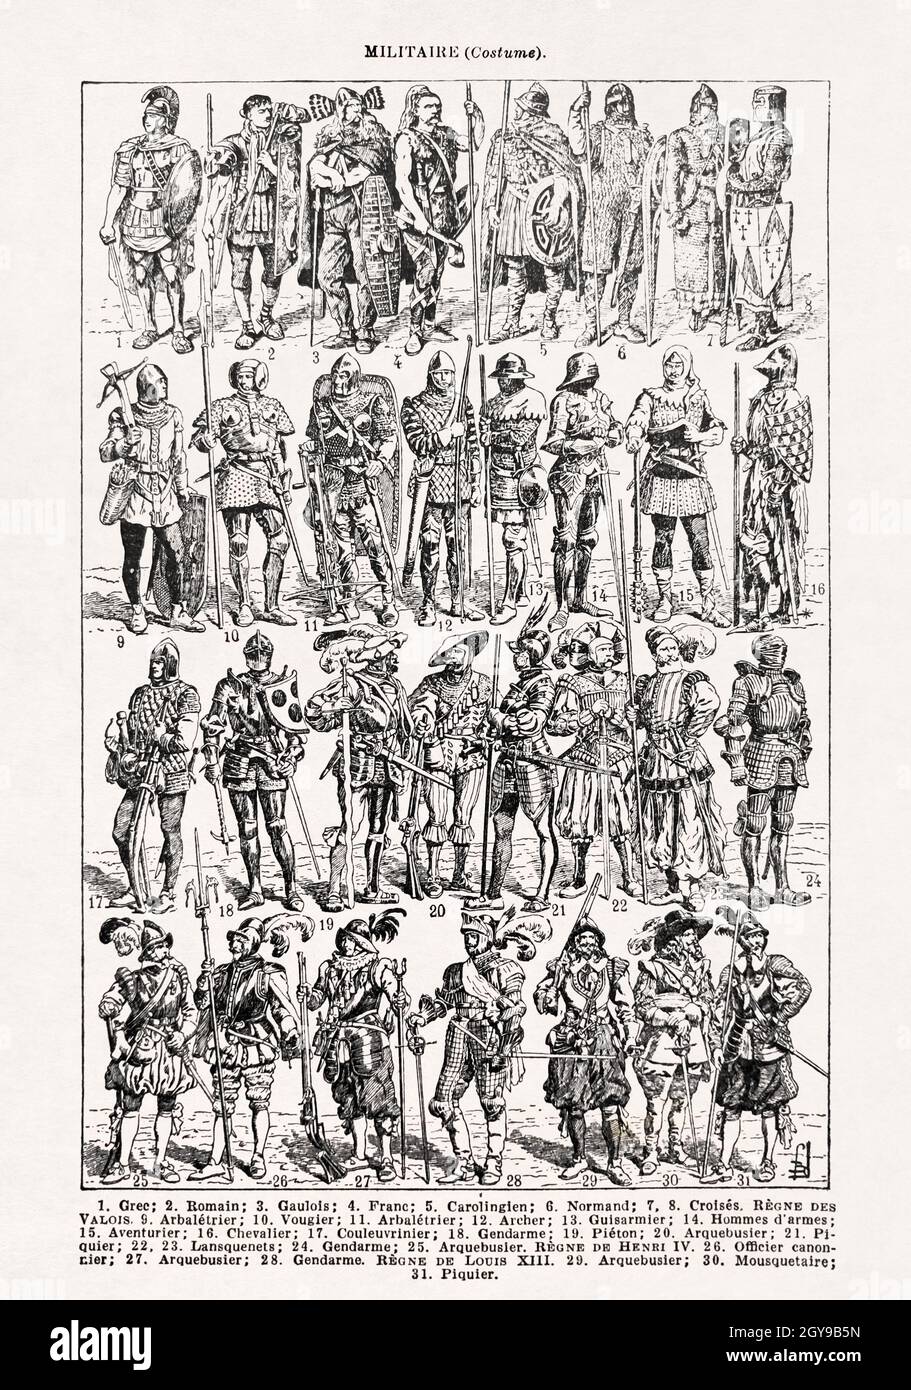 Old illustration about the French Army uniforms from the Roman Empire to Louis the XIII reign by Fed printed in the French dictionary 'Dictionnaire co Stock Photo